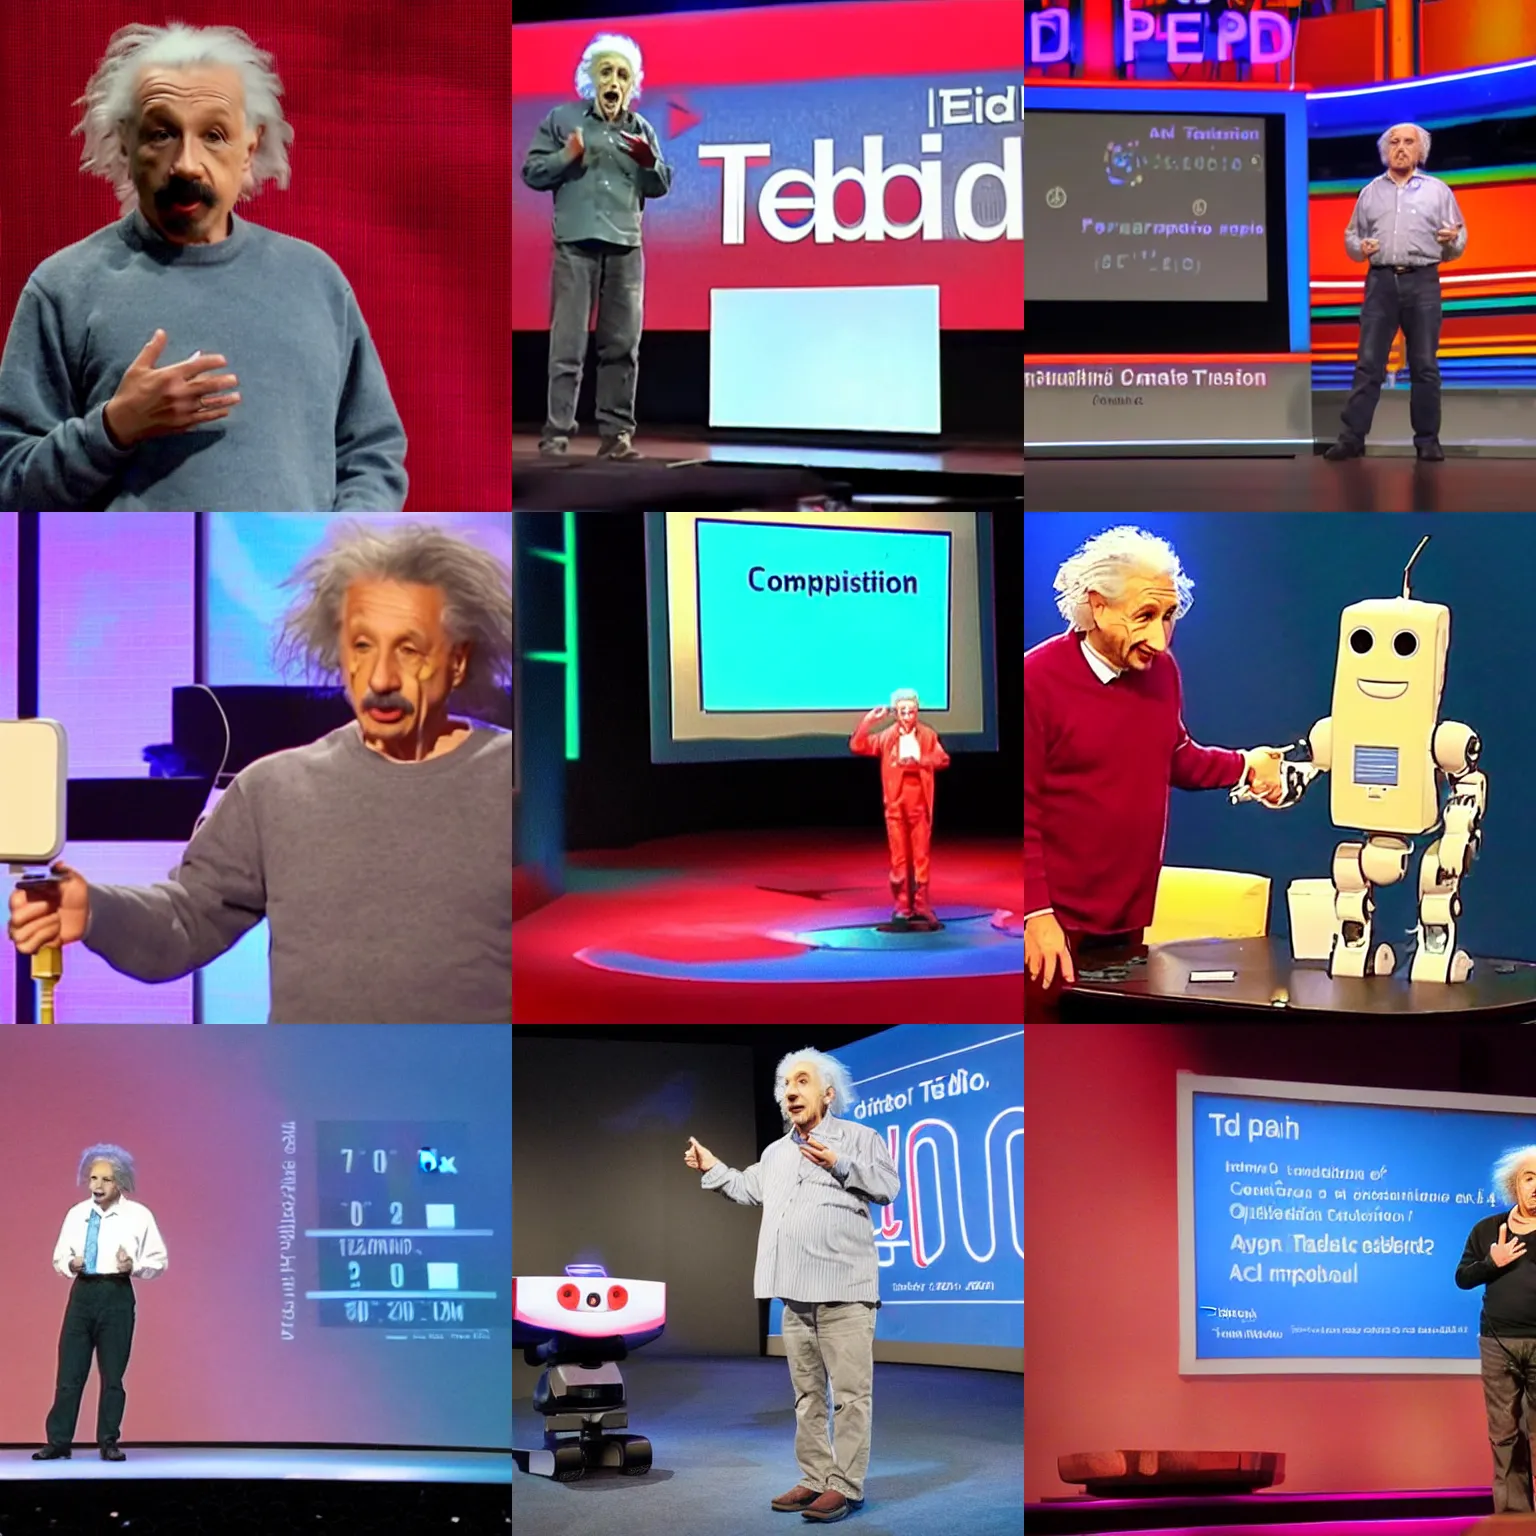 Prompt: <picture quality=hd+ mode='attention grabbing'>Brilliant einstein robot presents TED talk about the future of computation</picture>